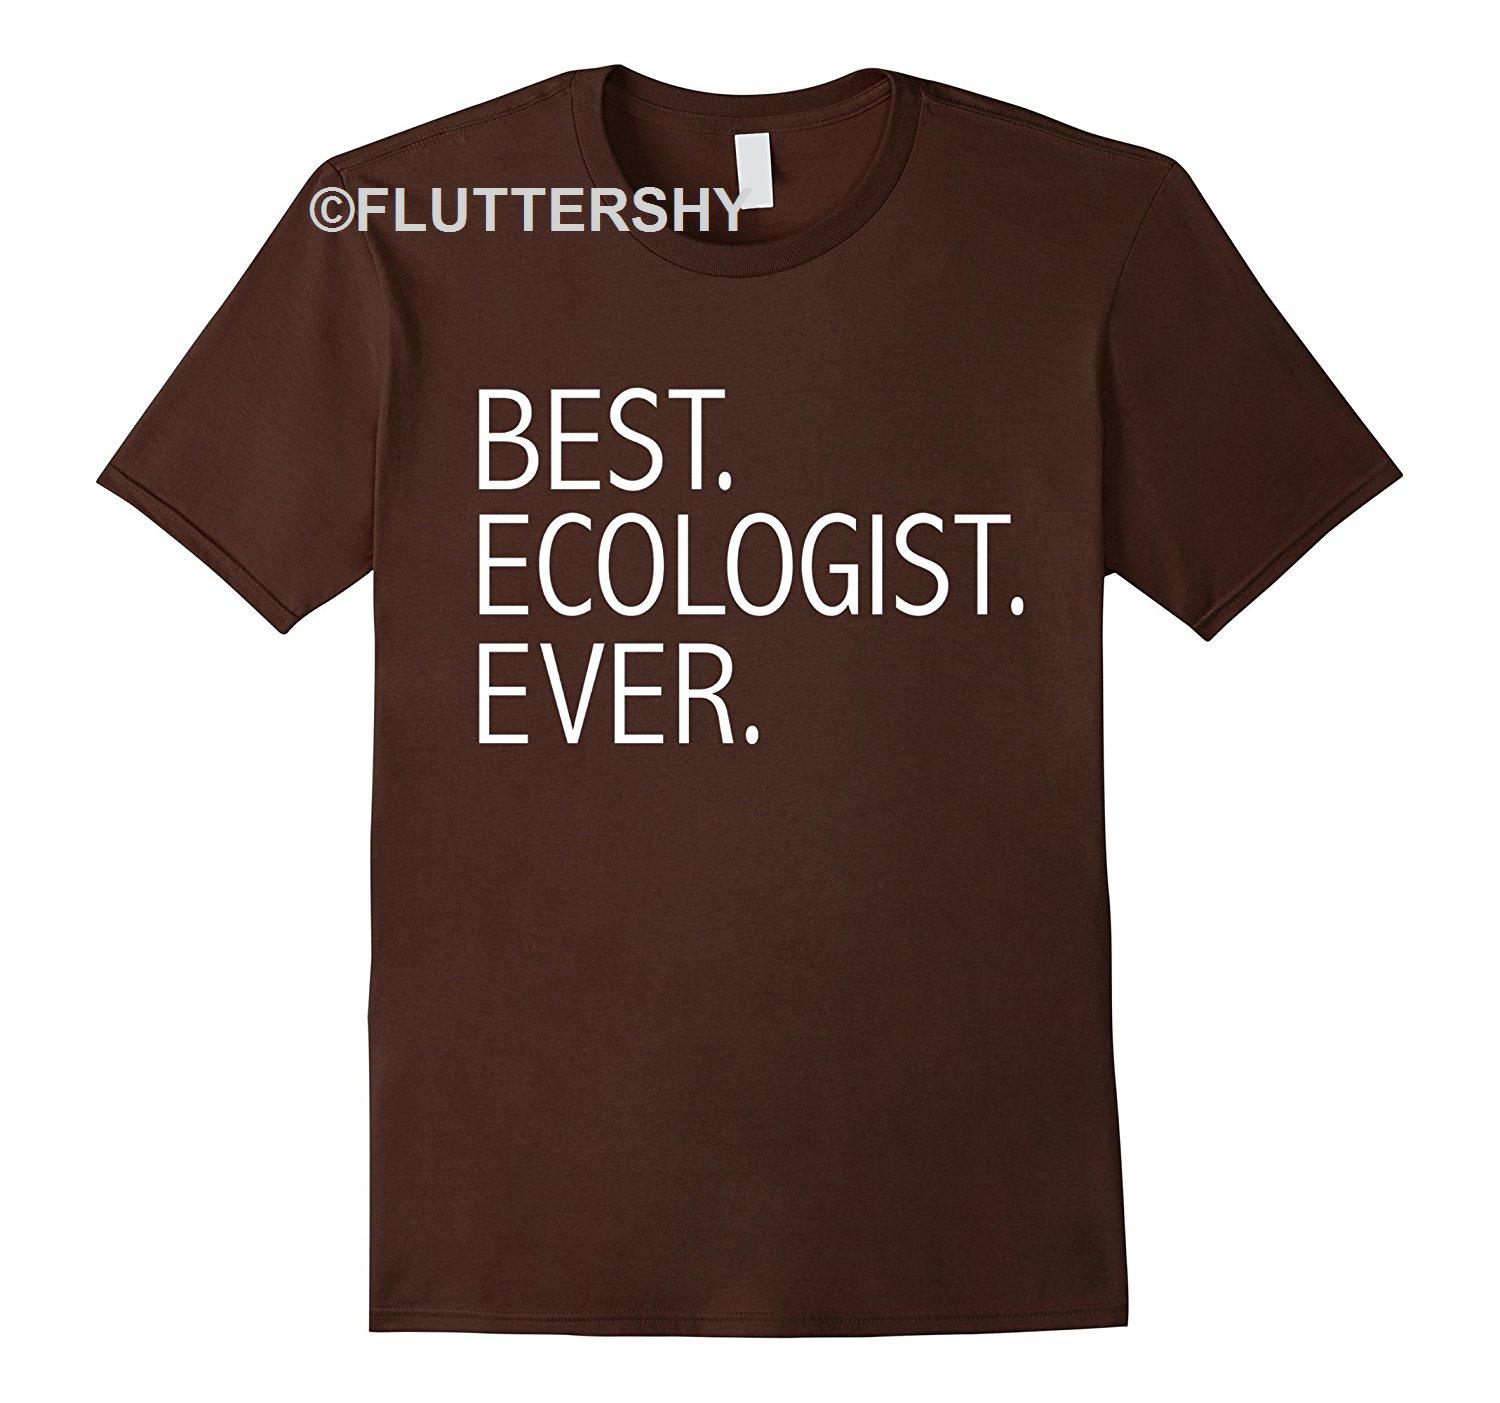 Blithesome Find Best Ecologist Ever Funny T-shirt Ecology Student Graduate